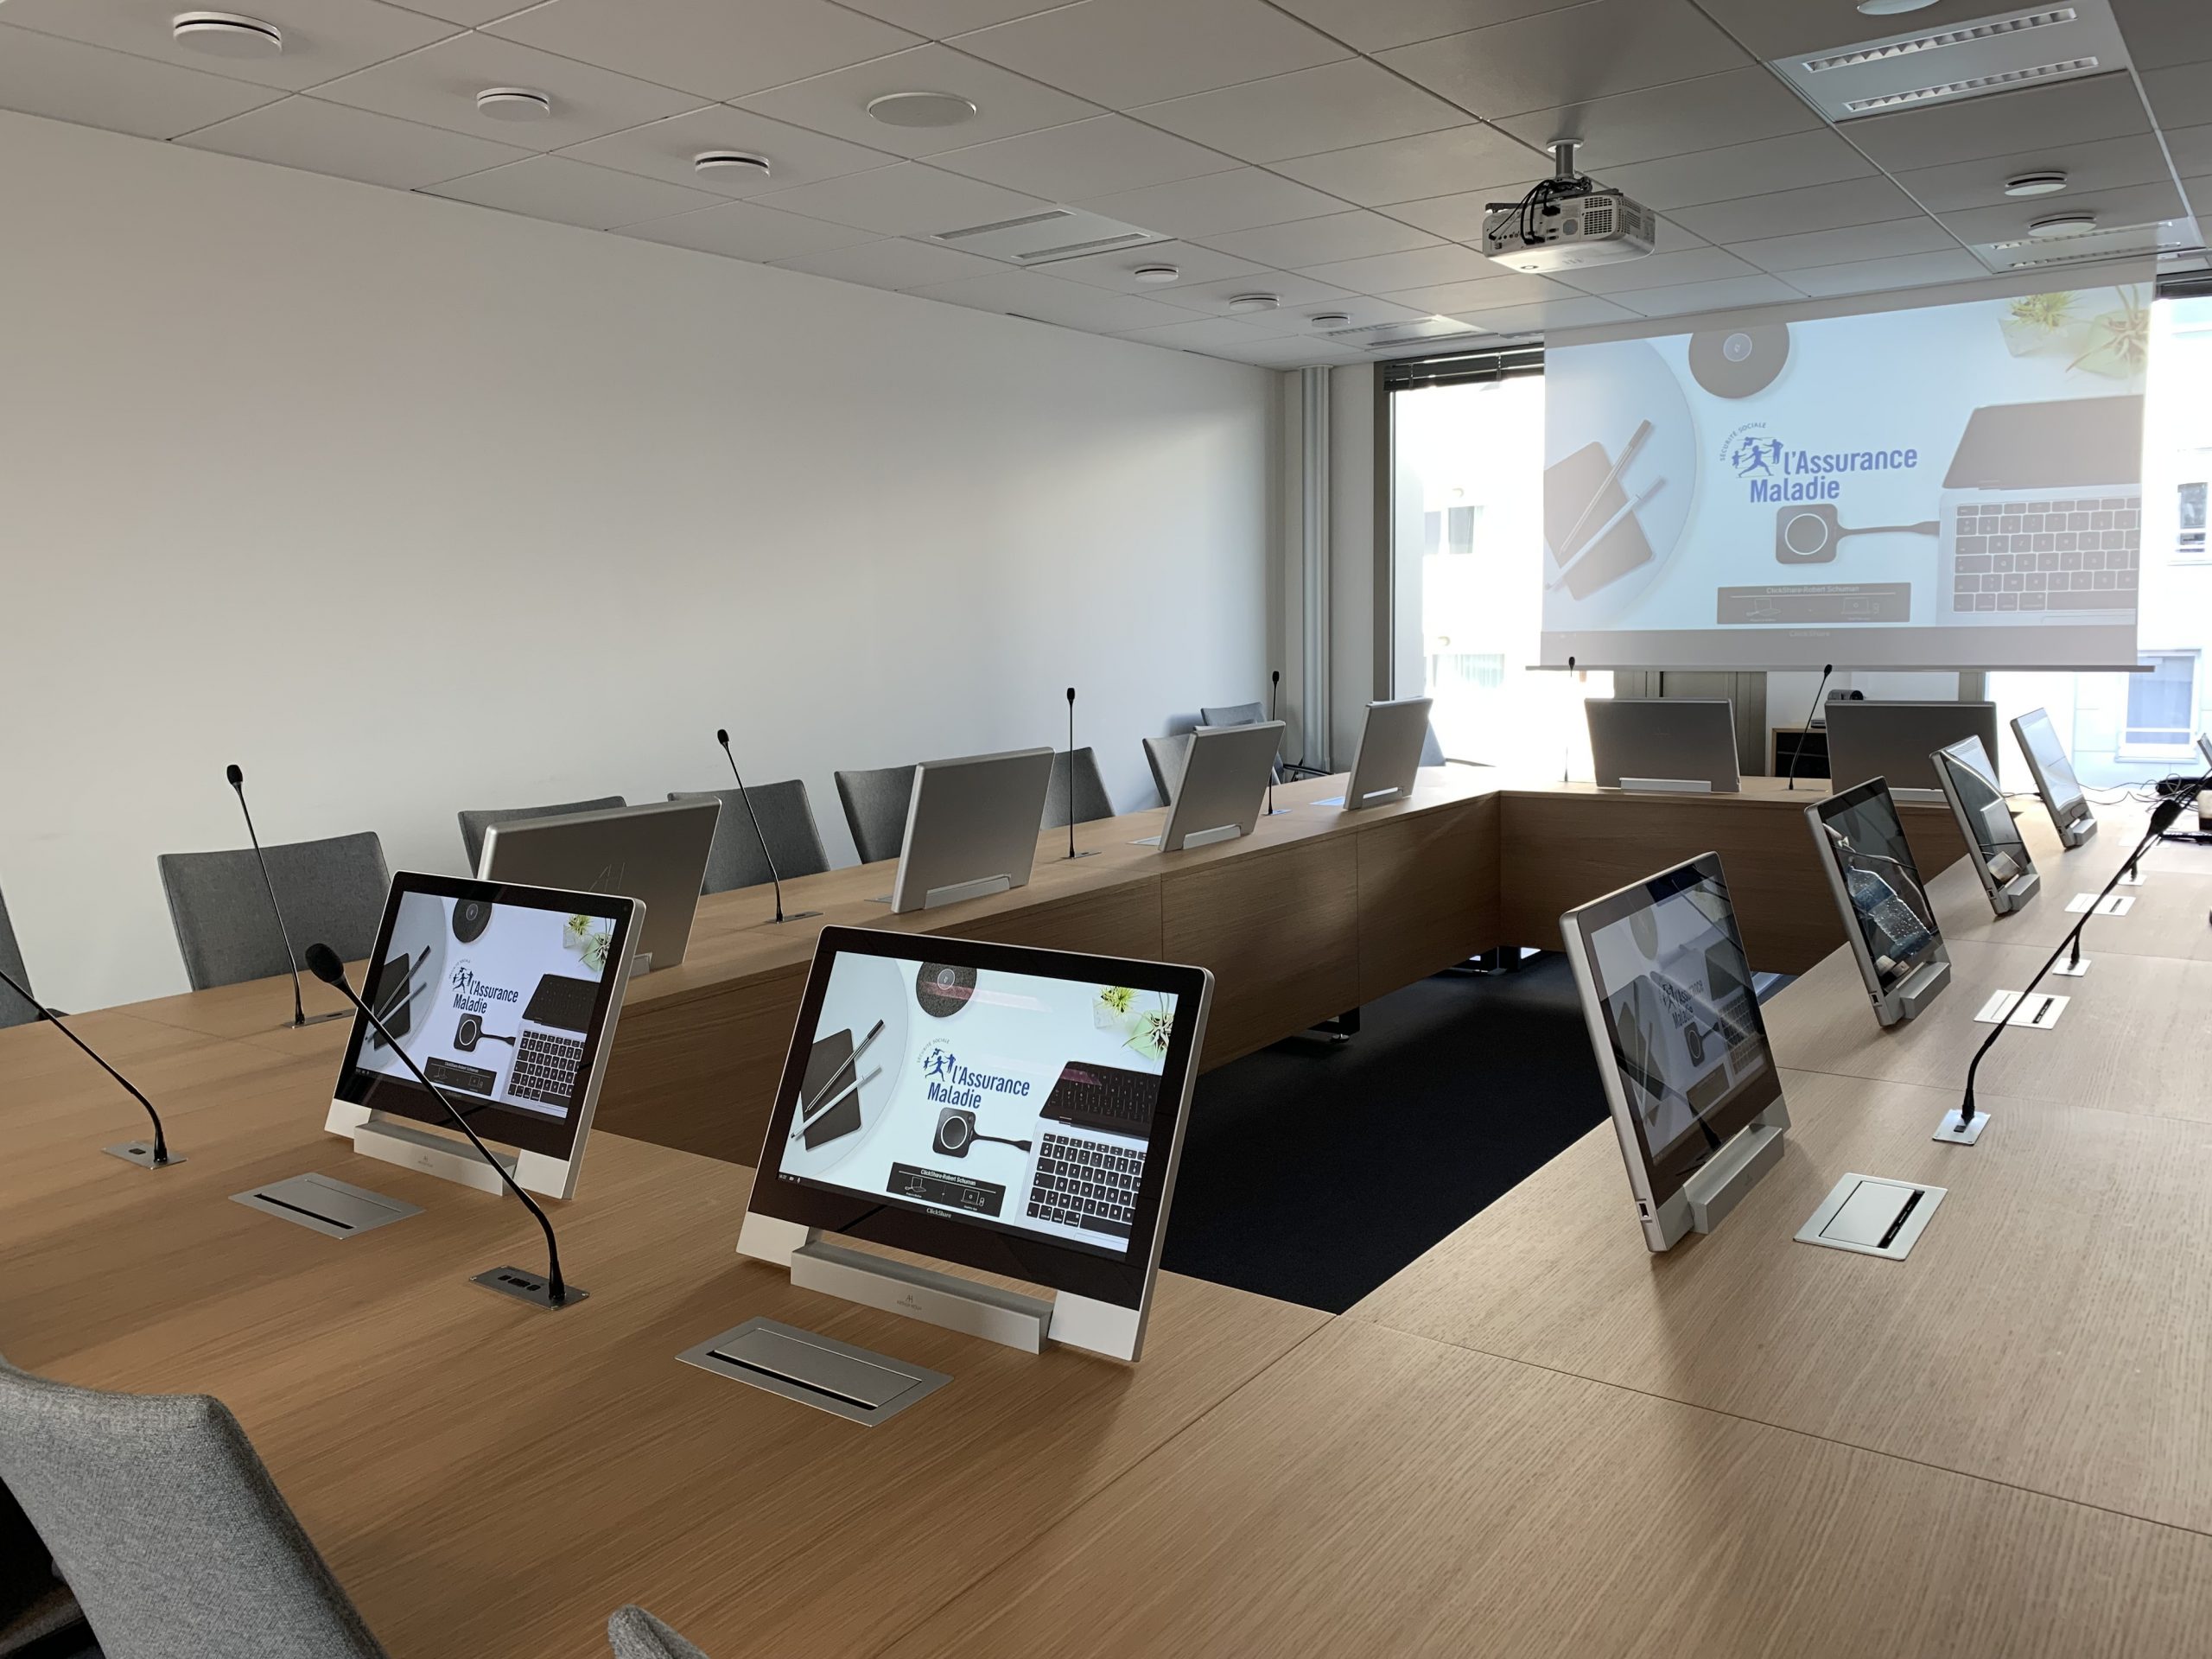 AH2 is an elegant monitor, and very easy to integrate in any meeting table. It can be manually folded down when not in use, giving a tidy, clean, streamlined view of the meeting space.